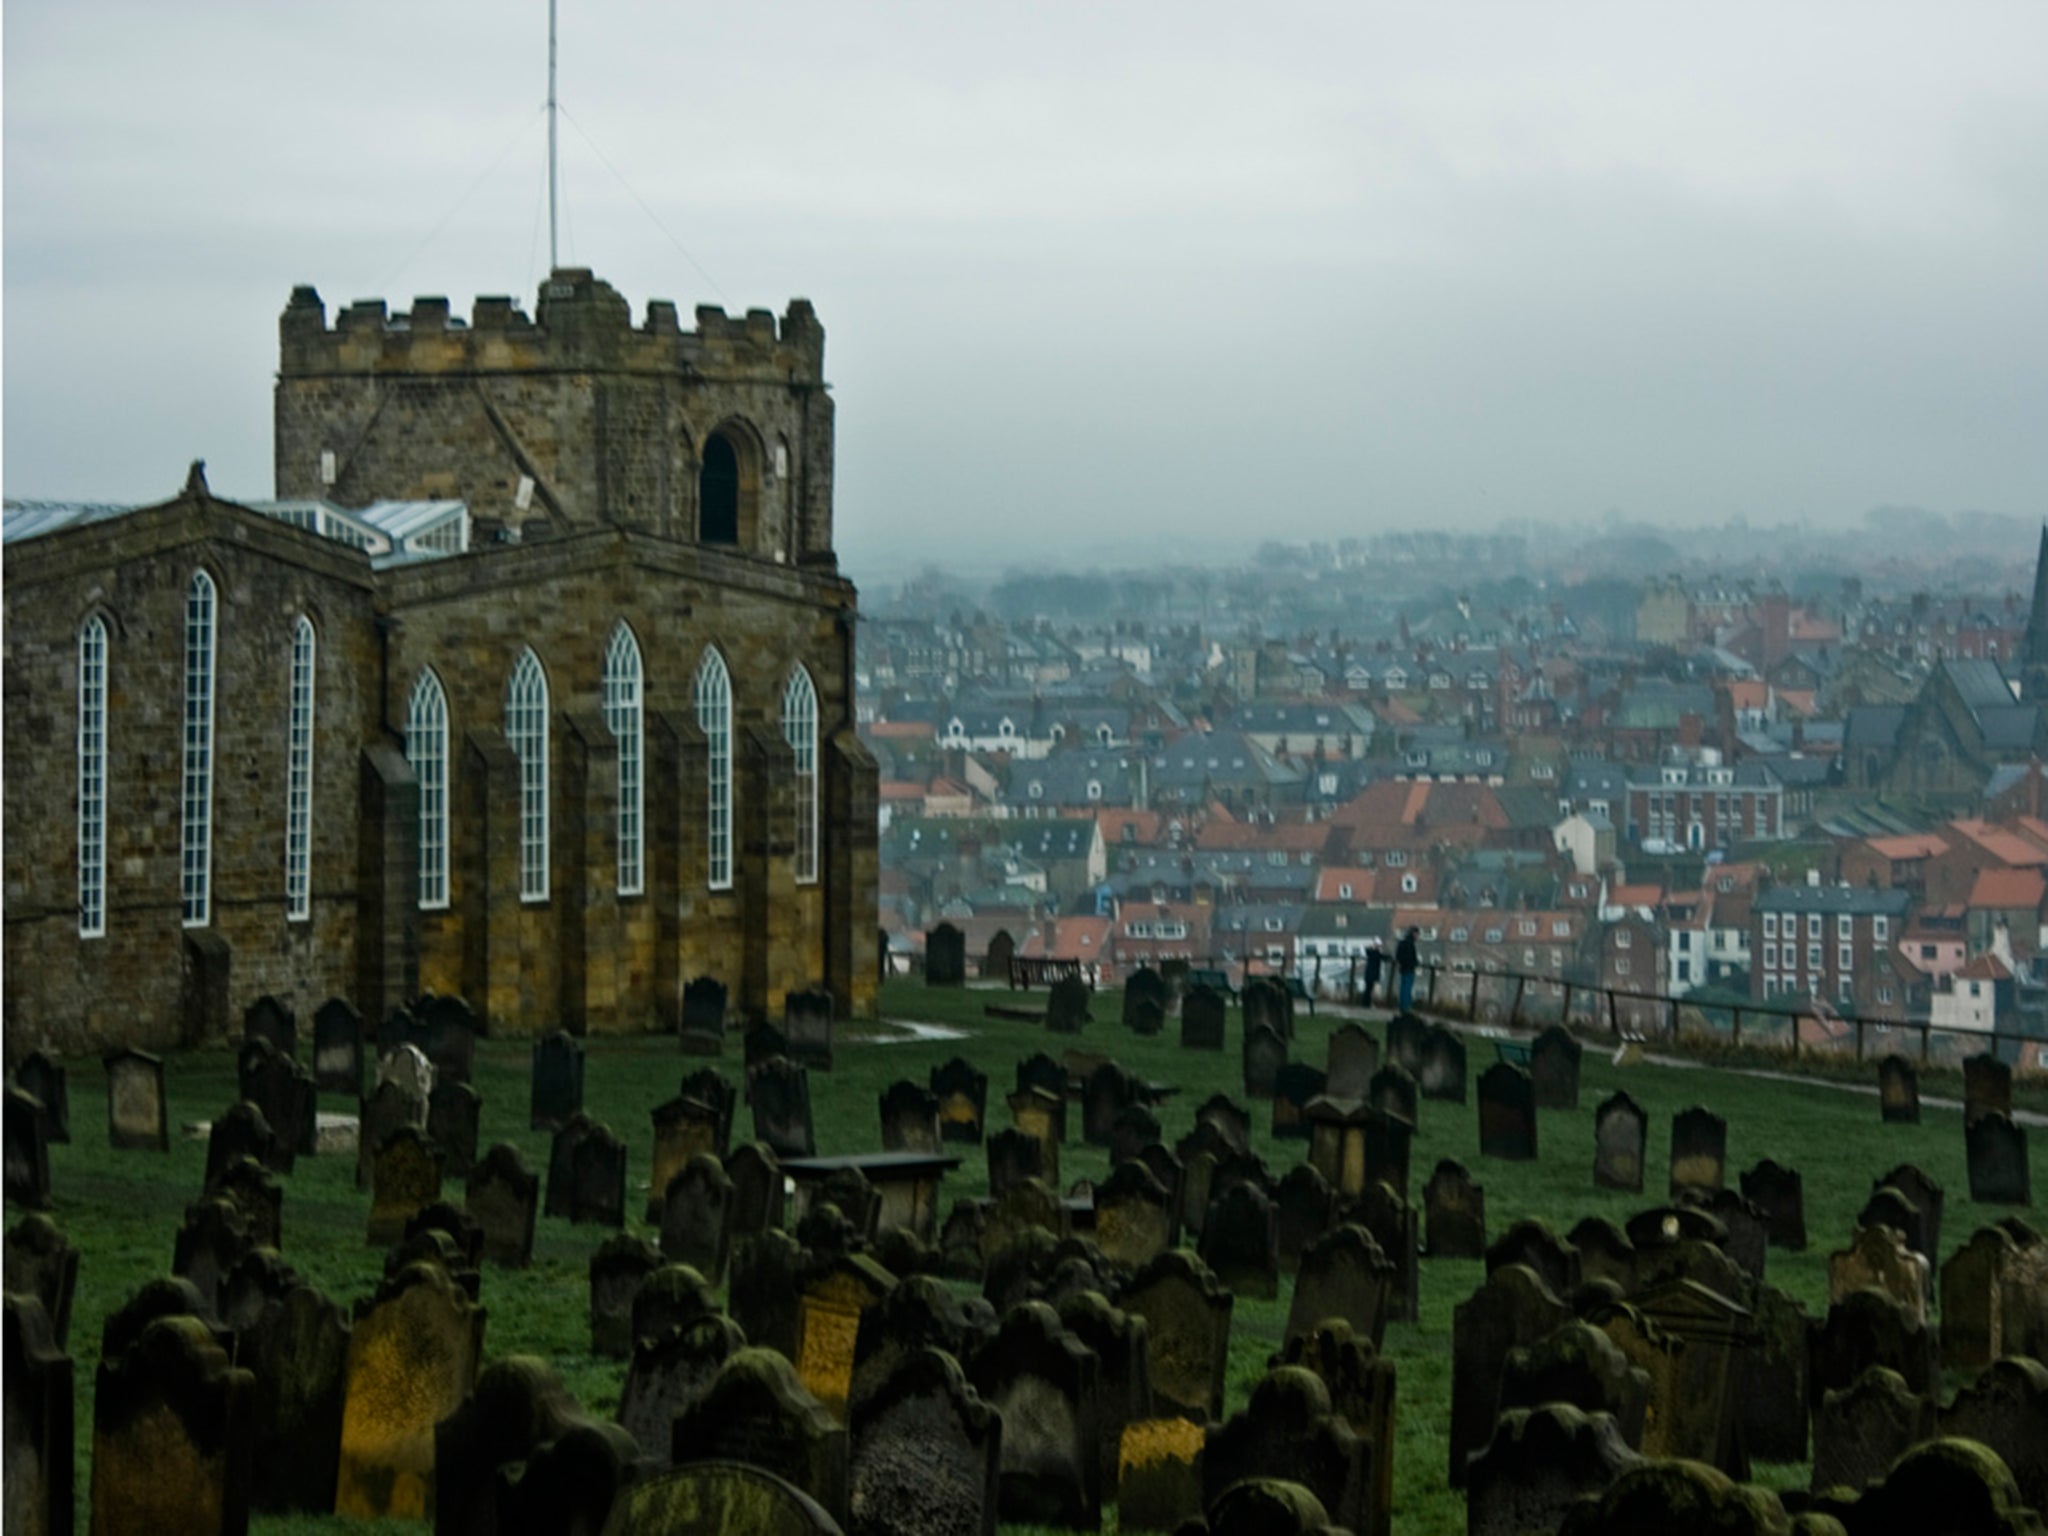 Whitby is a seaside town in North Yorkshire